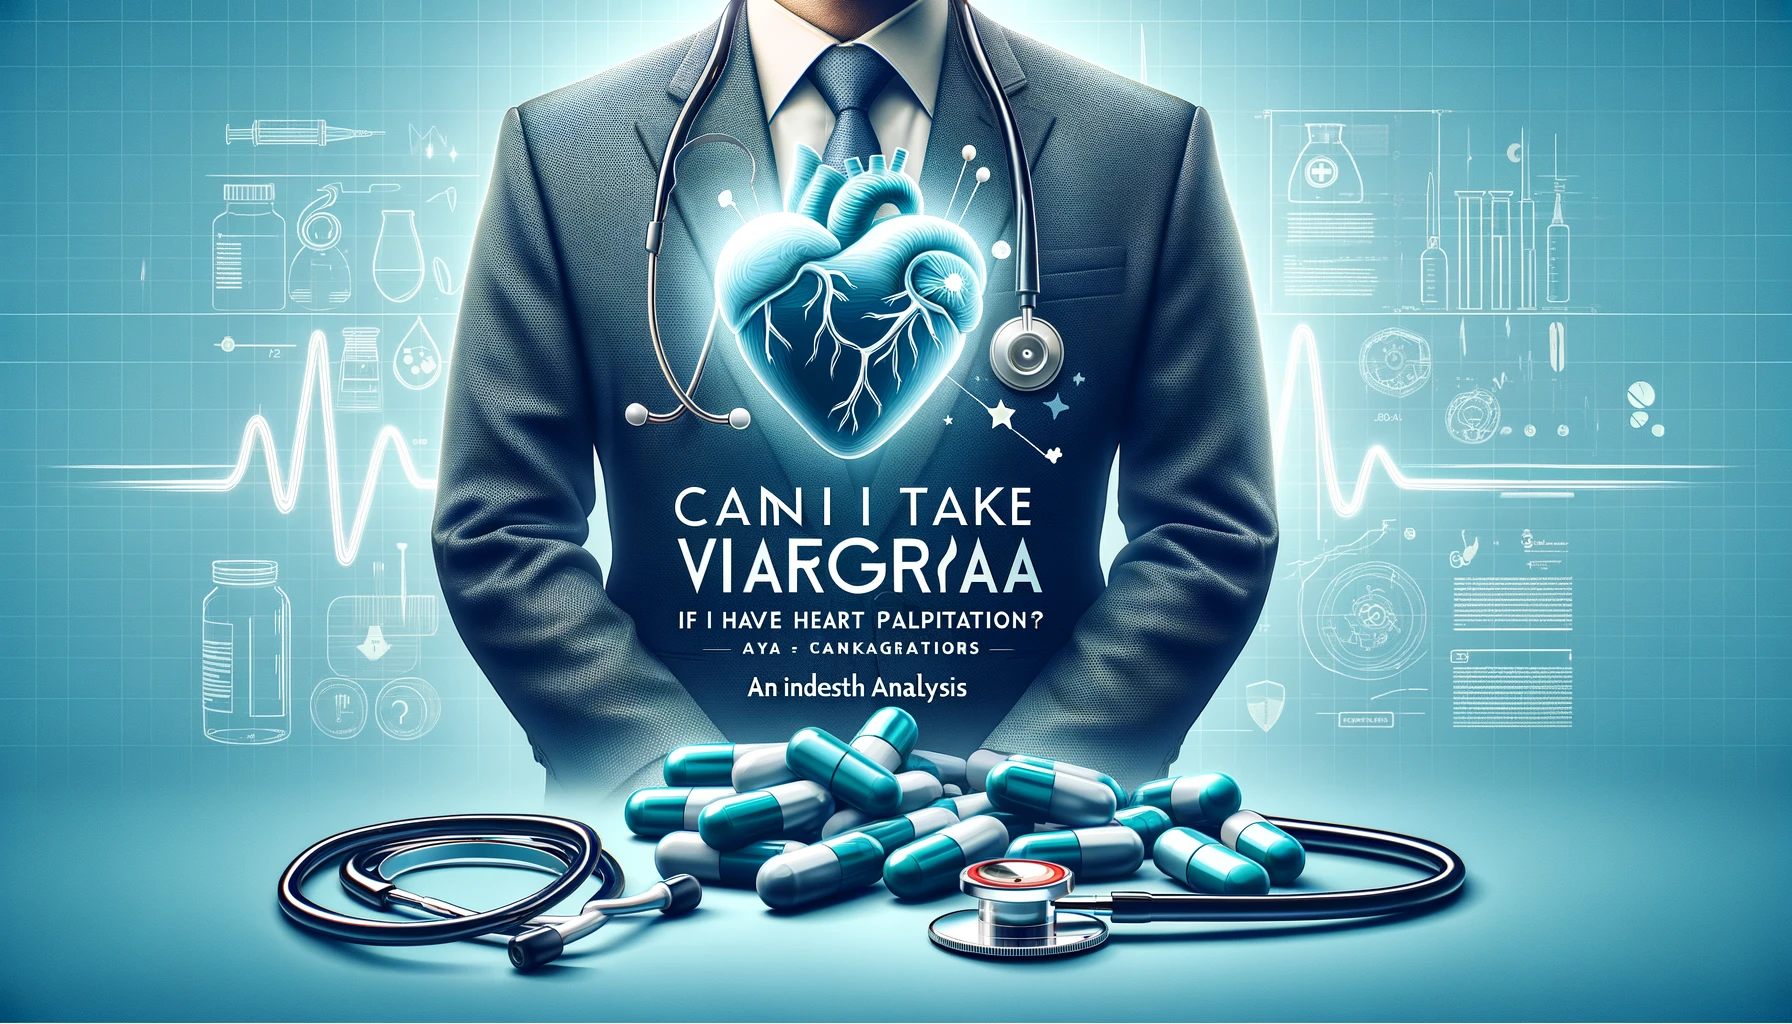 Featured image of an article on can i take viagra if i have heart palpitations